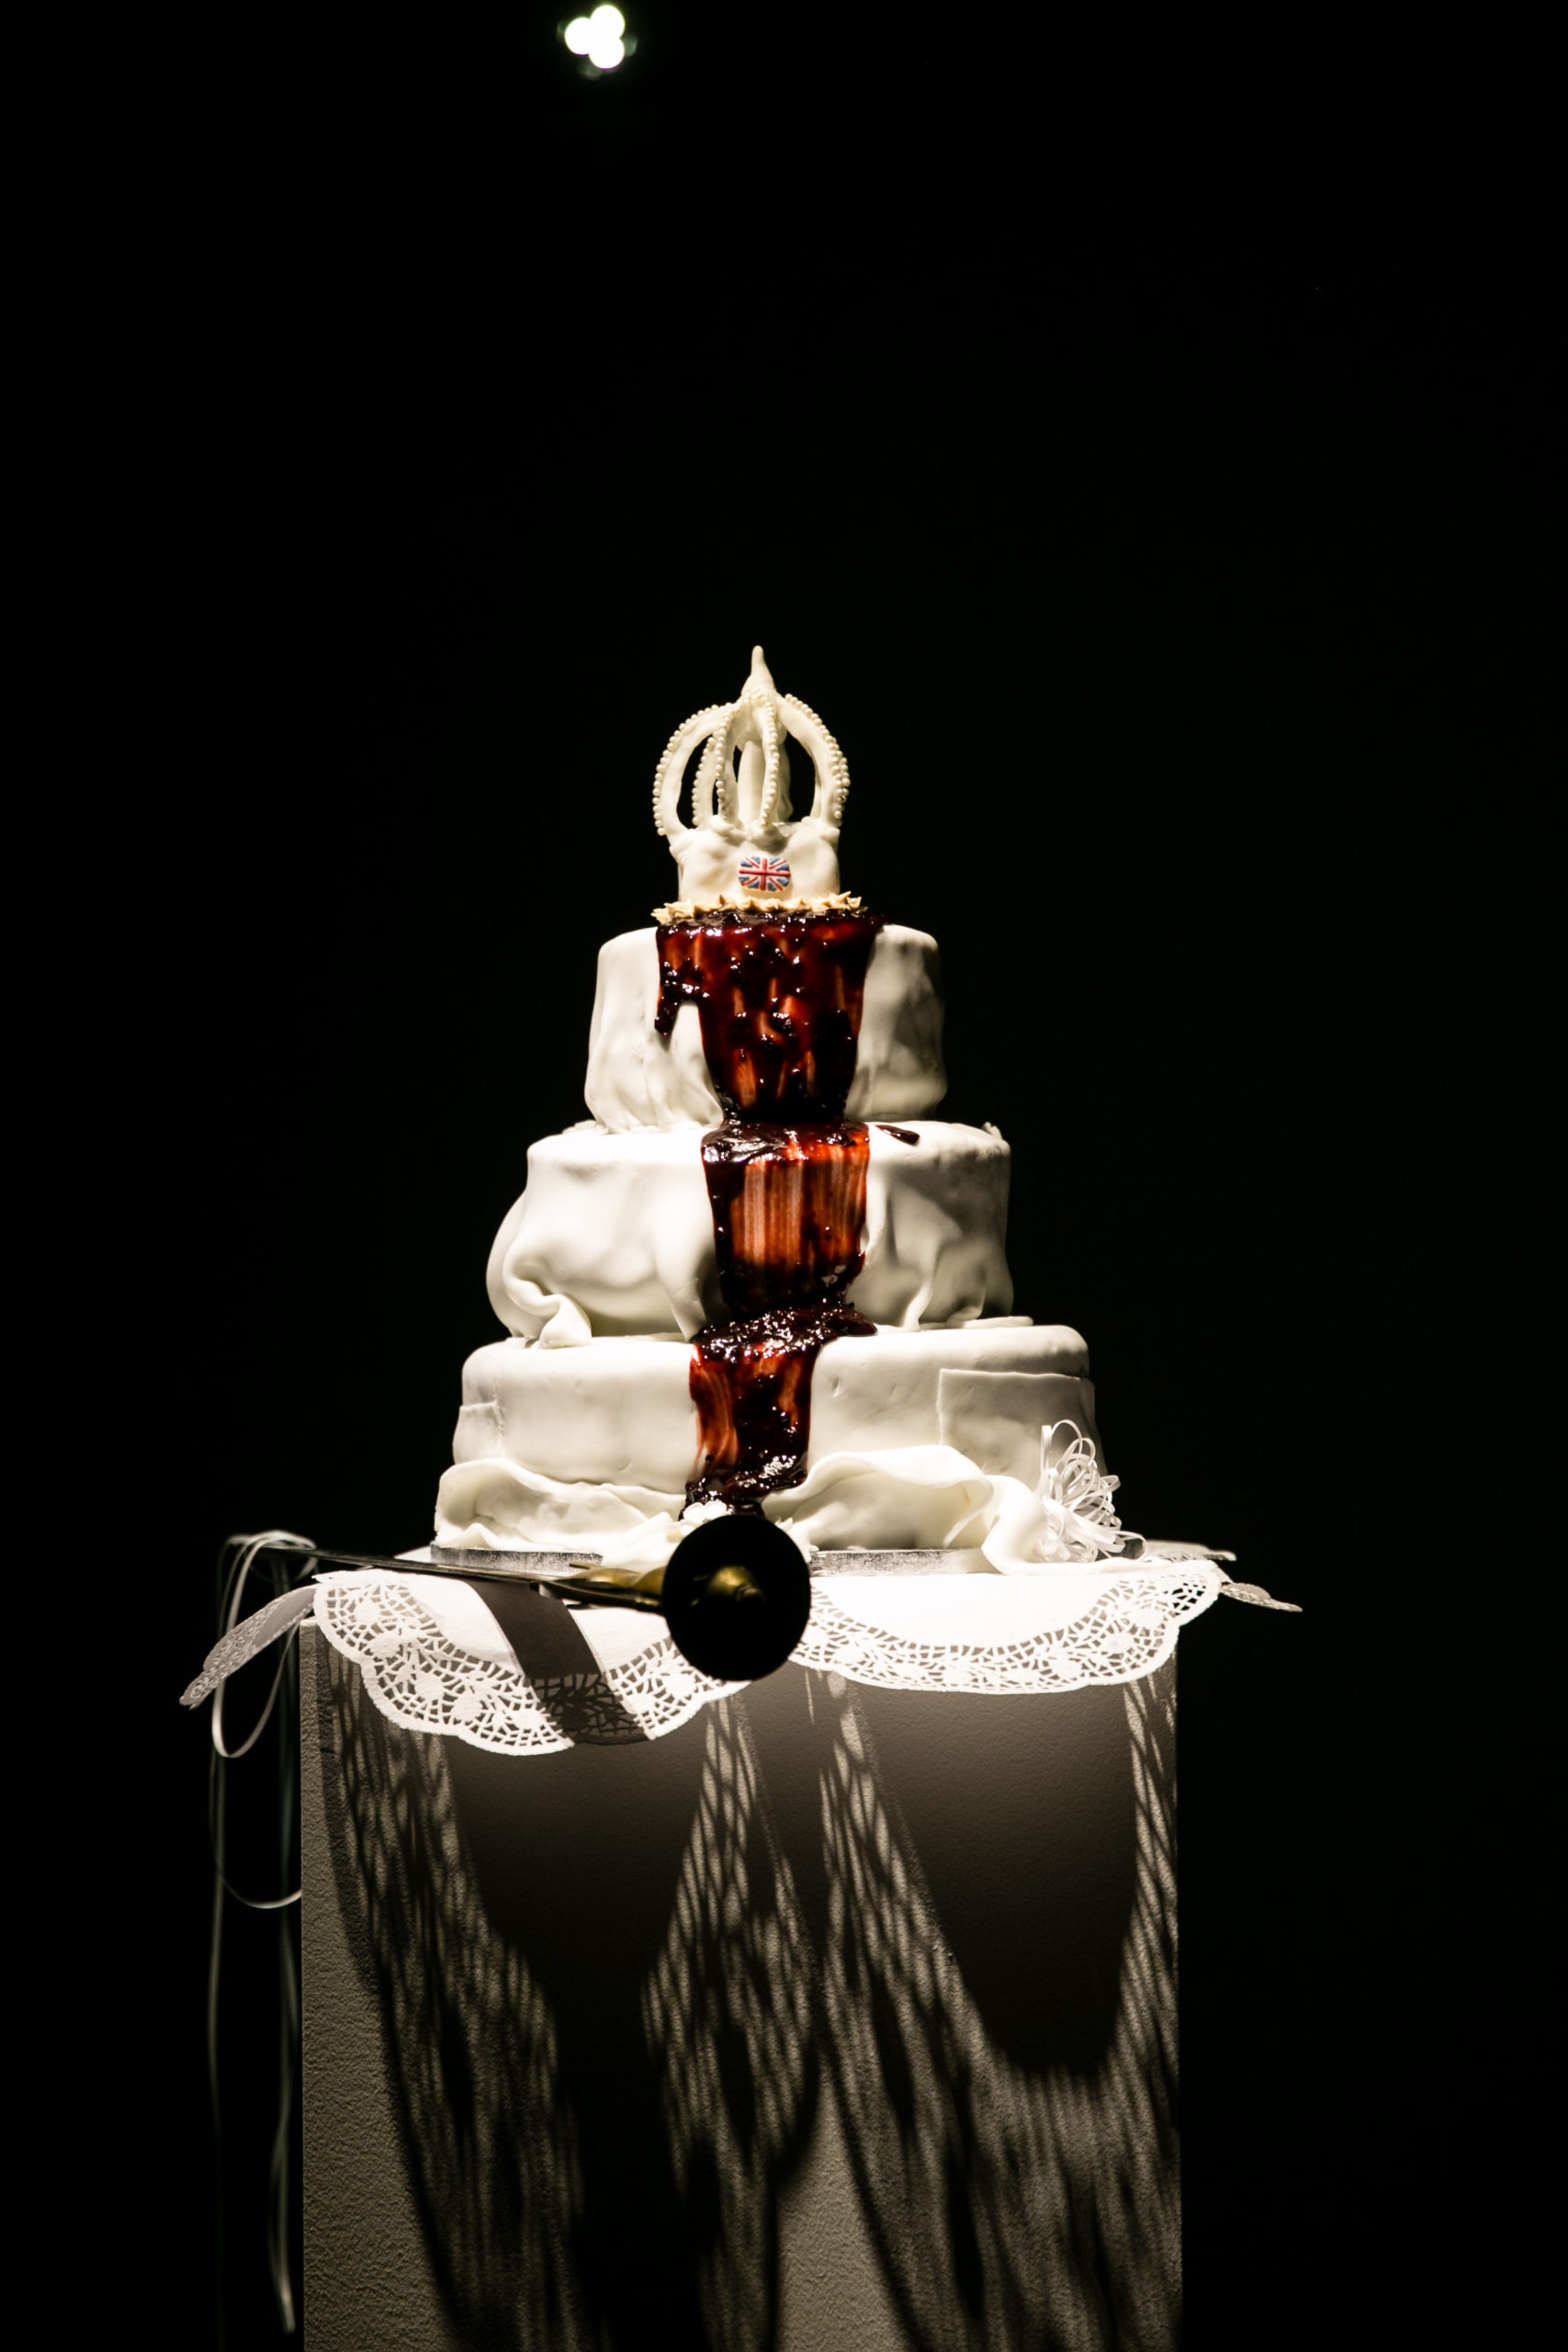 The there is black background with white table that has a three tiered cake in thick white fondant icing, with a white crown cake topper on the top tier. This cake topper is also made of the same thick icing and has a union flat painted in the center of the crown's band. Down the center of the cake, from beneath the crown, spilling down the three tiers is a thick red, blood-like substance. The cake is on a round table with a white cloth and a large white round dollie.